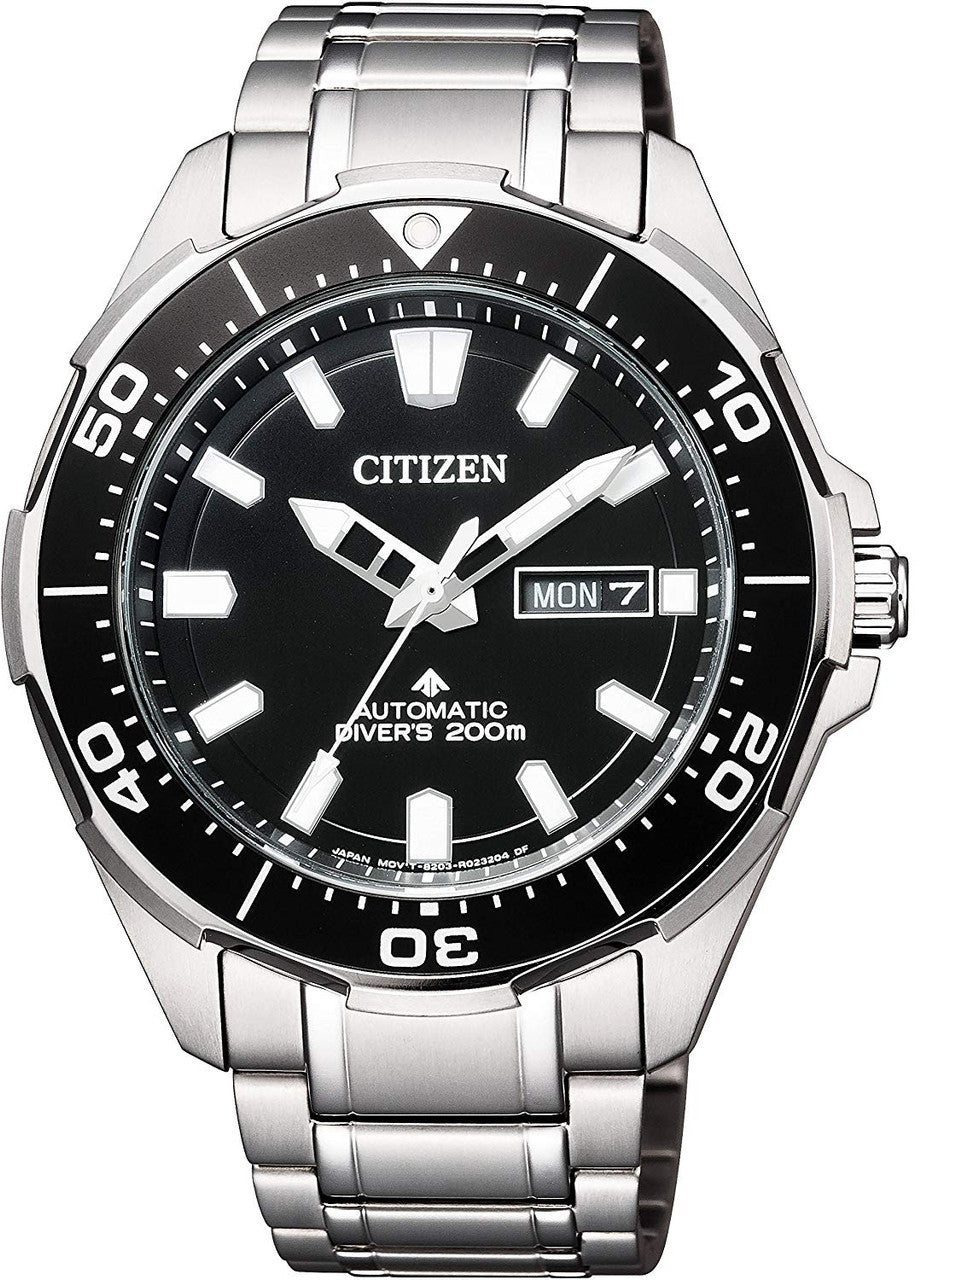 CITIZEN  PROMASTER Watch MARINE Mechanical Diver 200m NY0070-83E Watch - IPPO JAPAN WATCH 